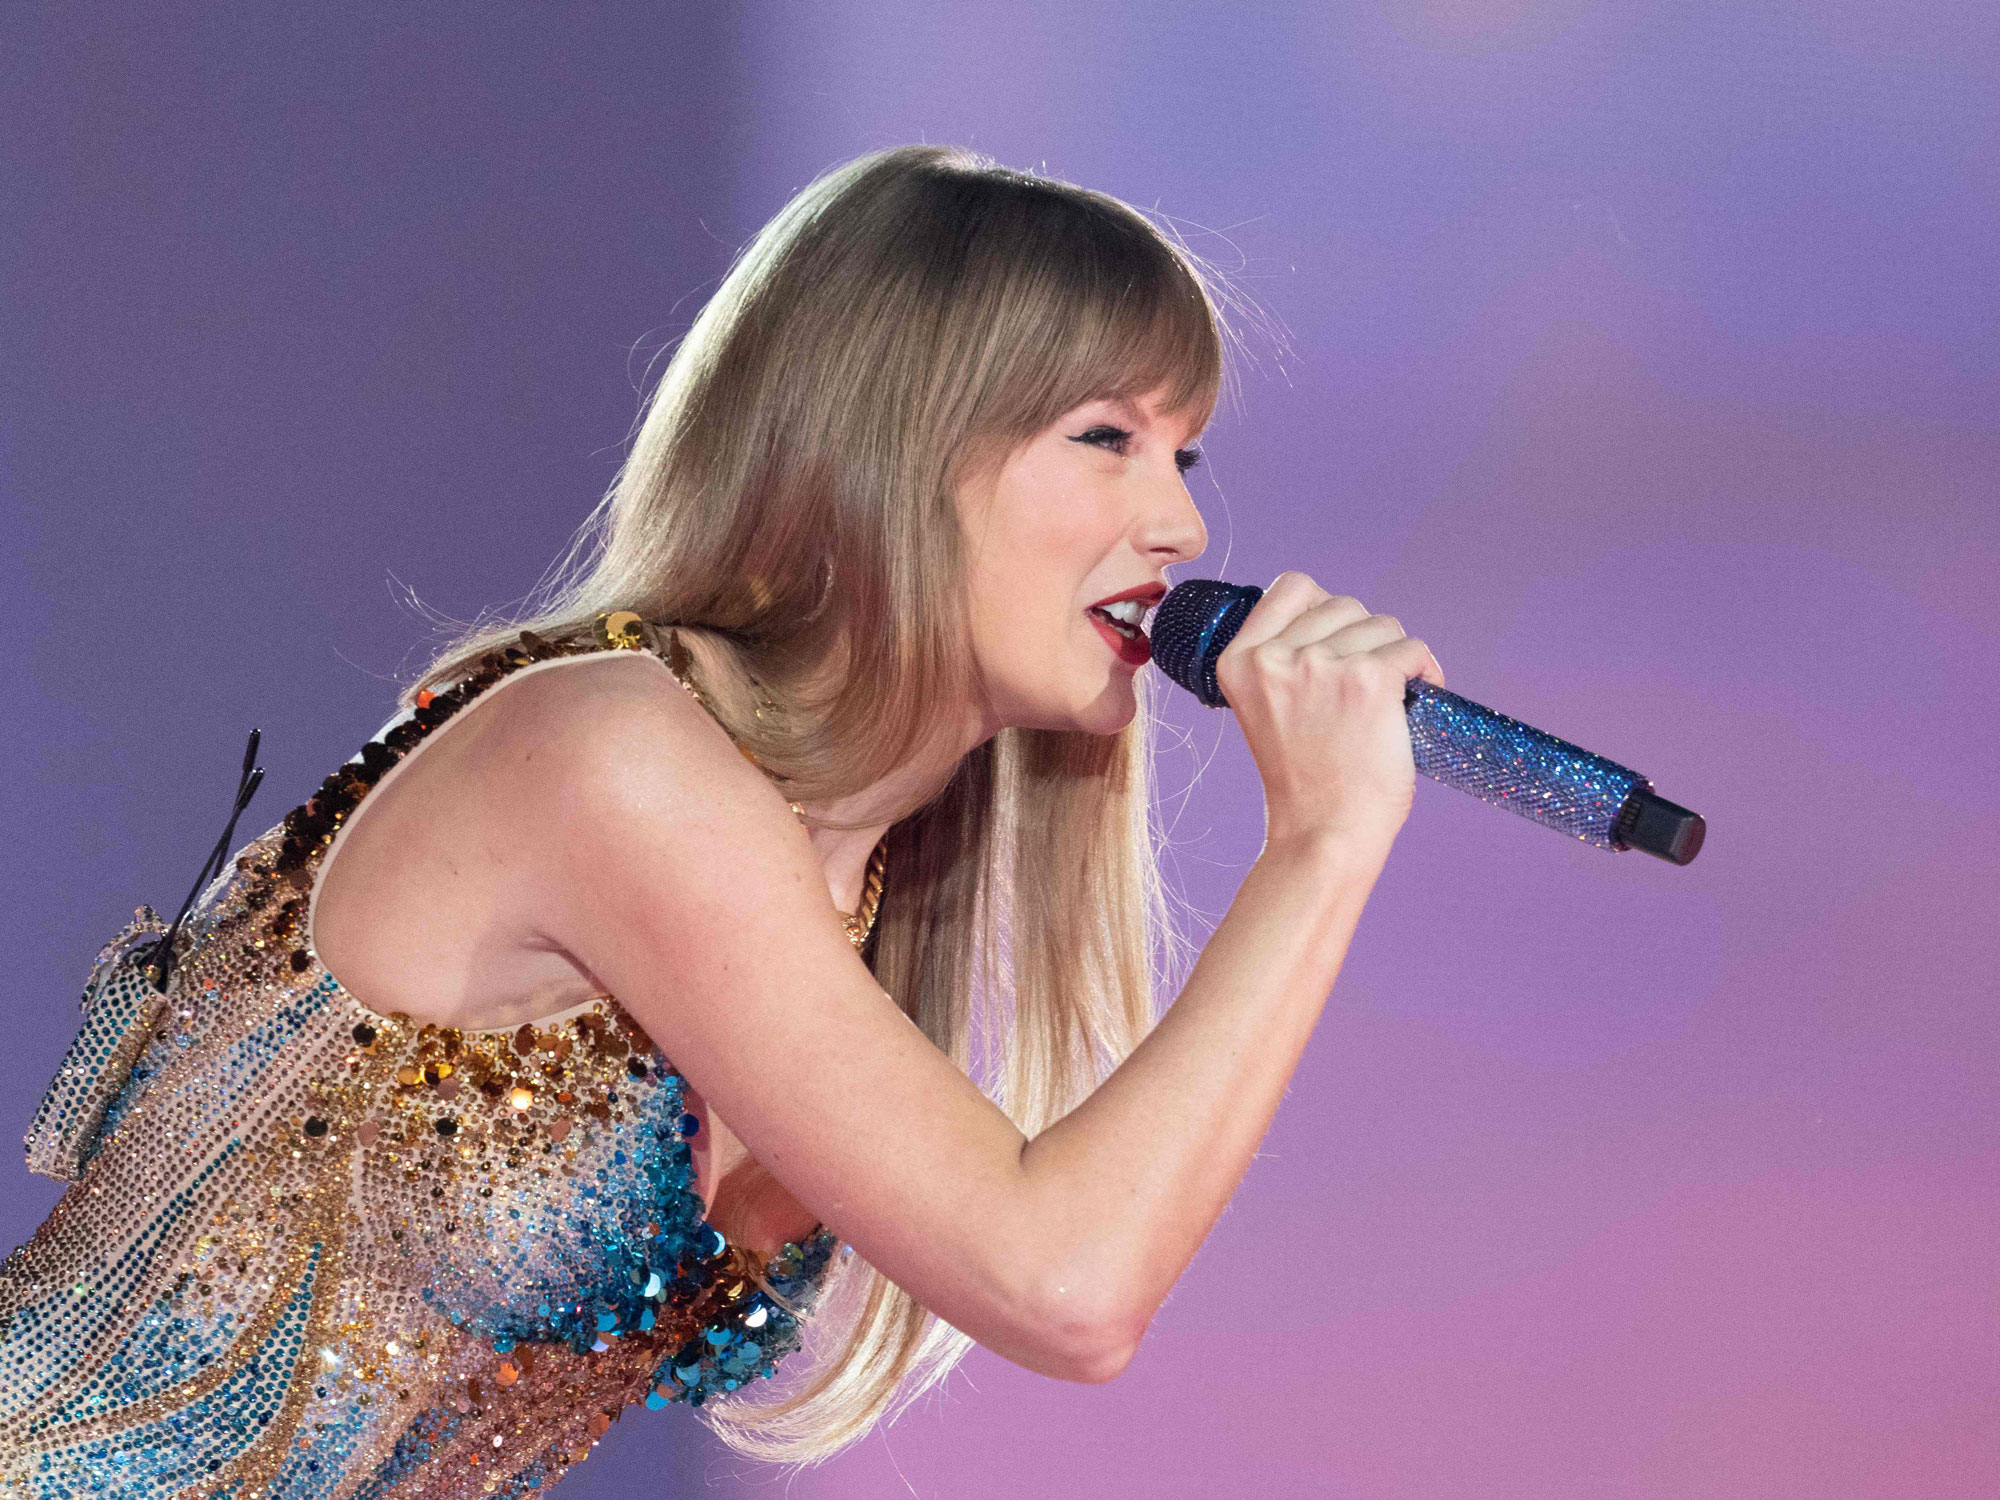 Federal Reserve credits Taylor Swift with boosting hotel revenues